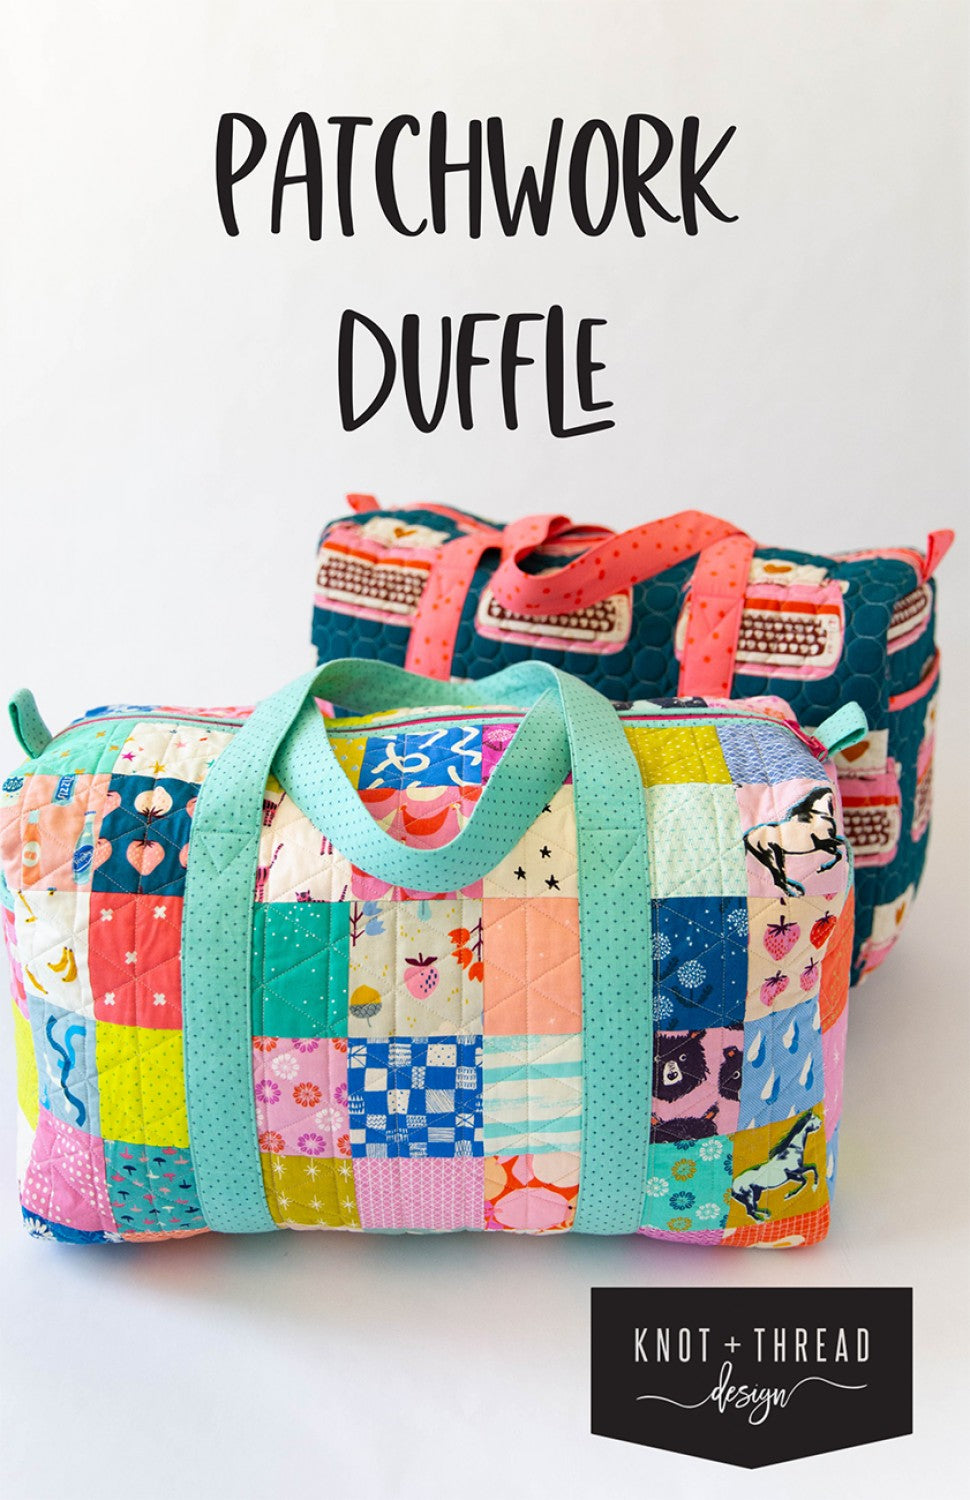 Patchwork Duffle by Knot & Thread Design - PAPER Pattern